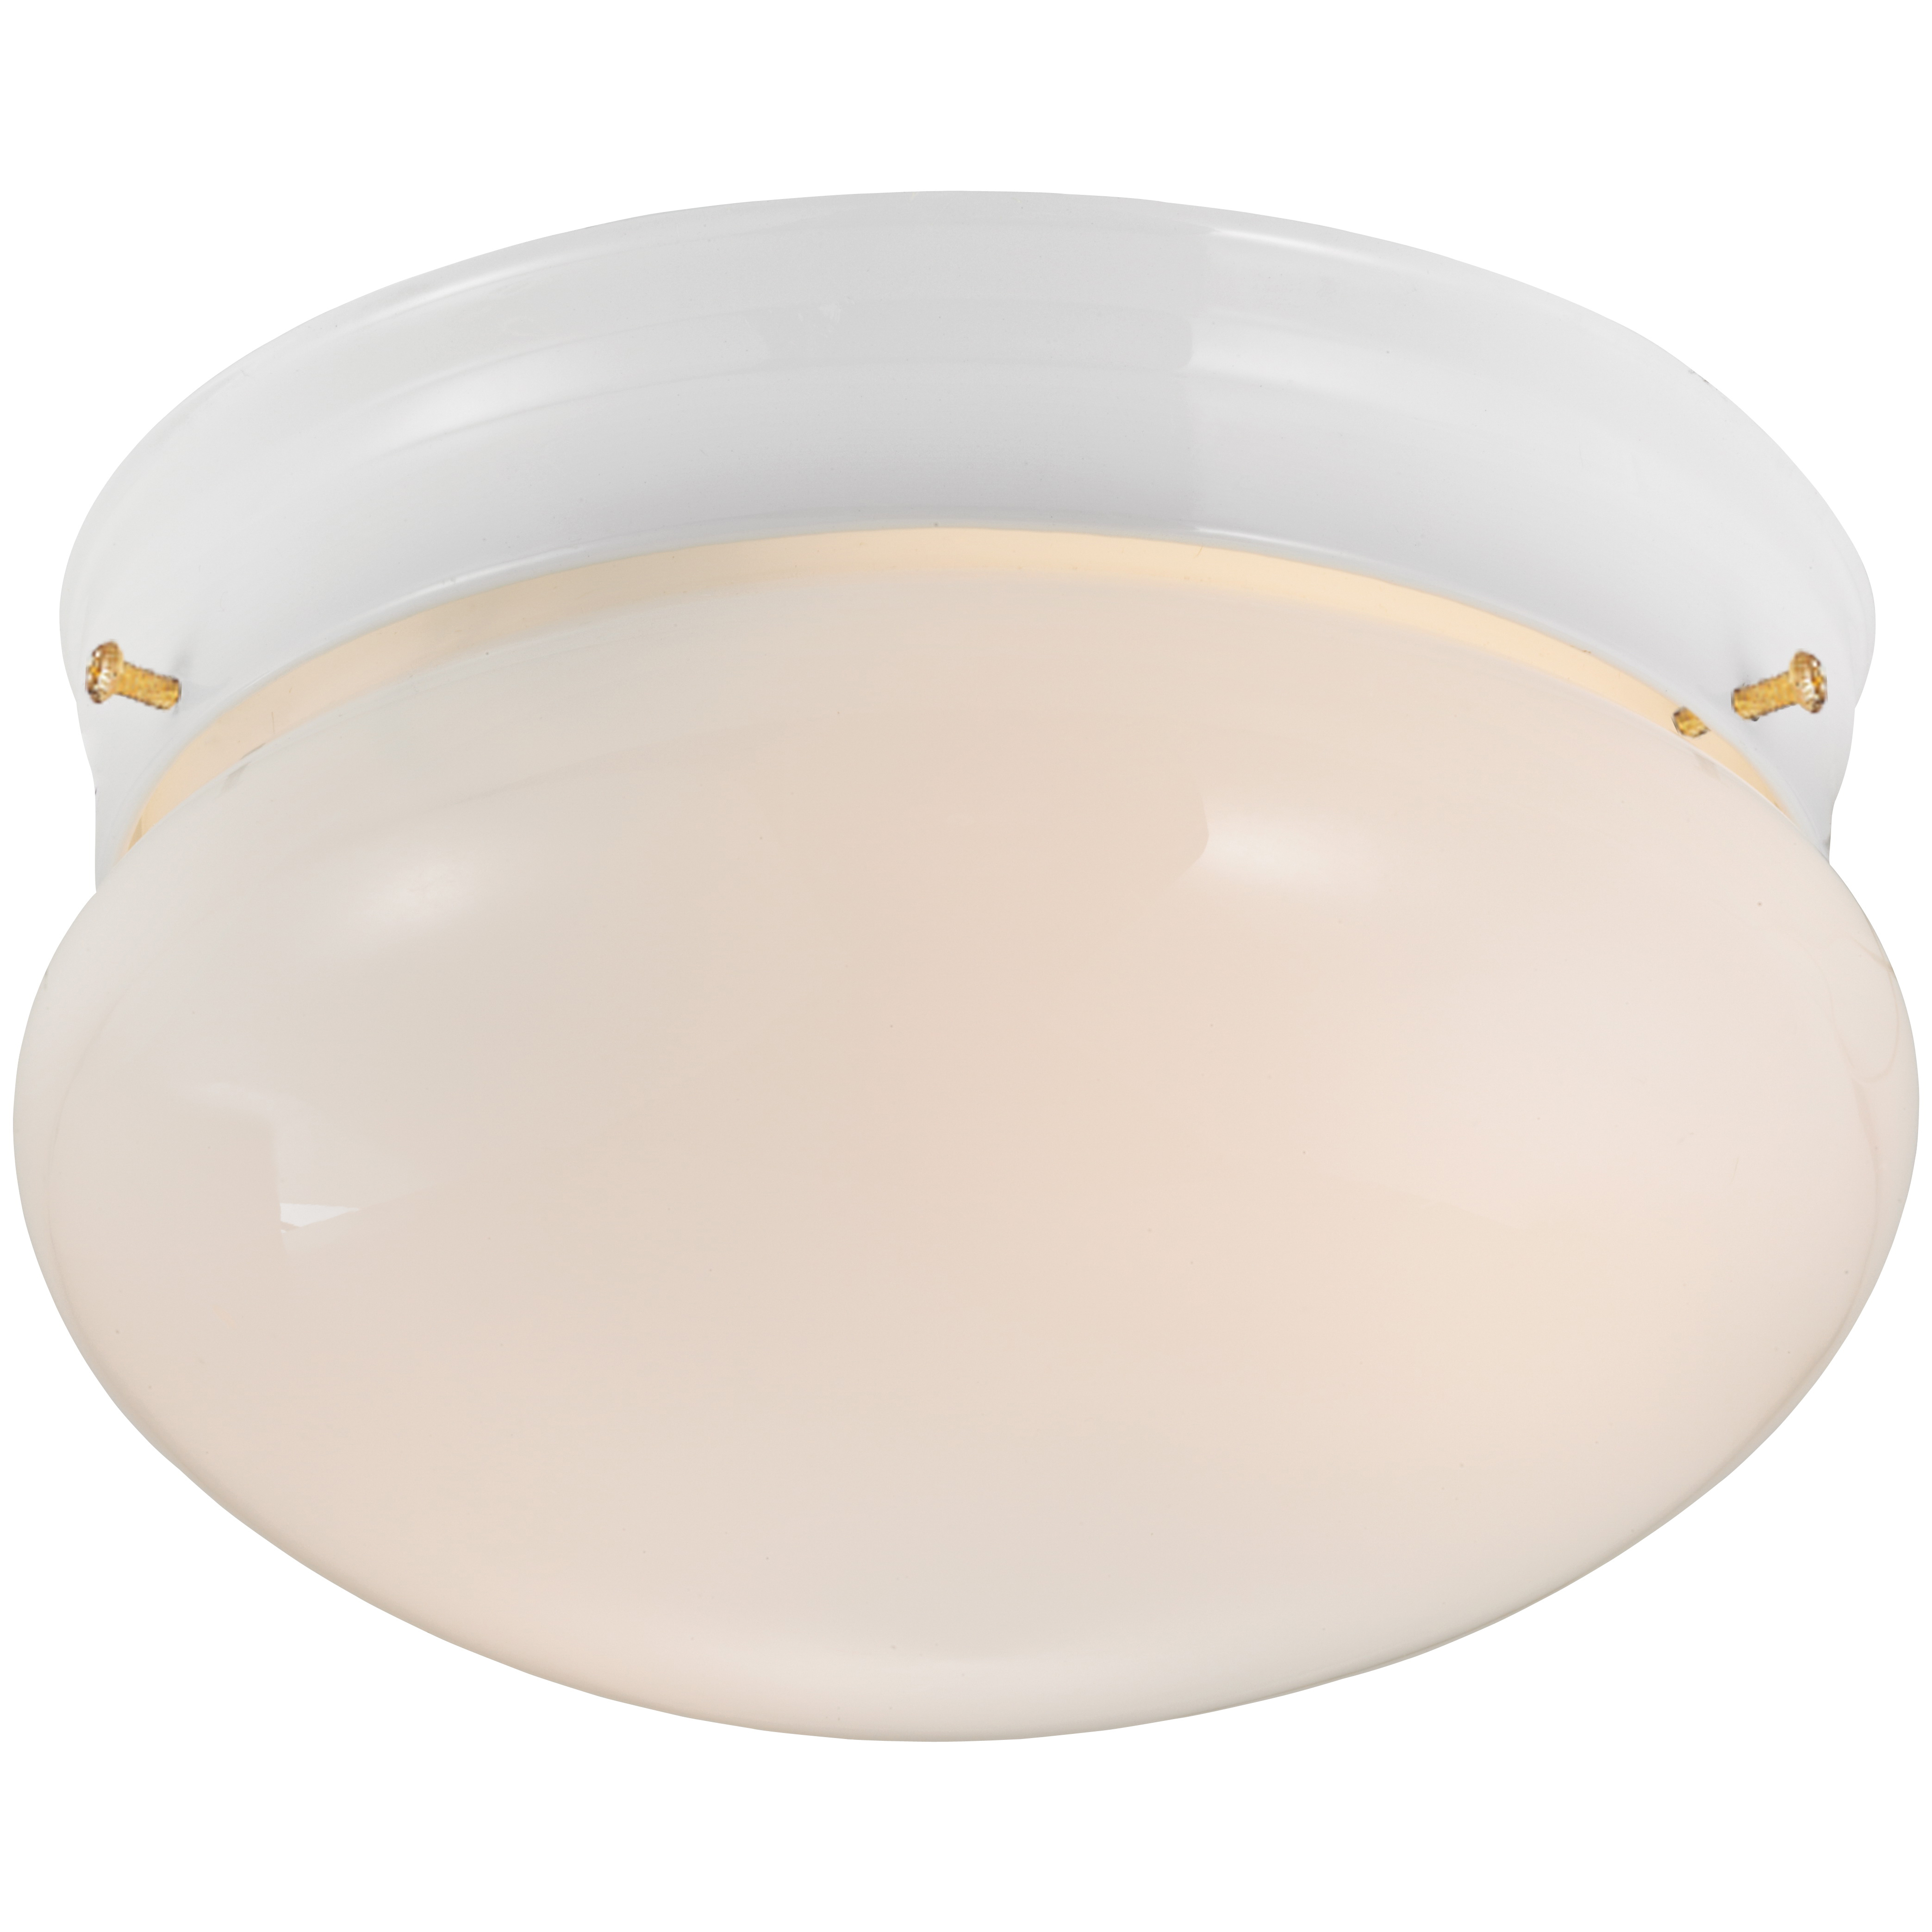 F14BB02-8005-WH Two Light Round Ceiling Fixture, 120 V, 60 W, 2-Lamp, A19 or CFL Lamp, White Fixture